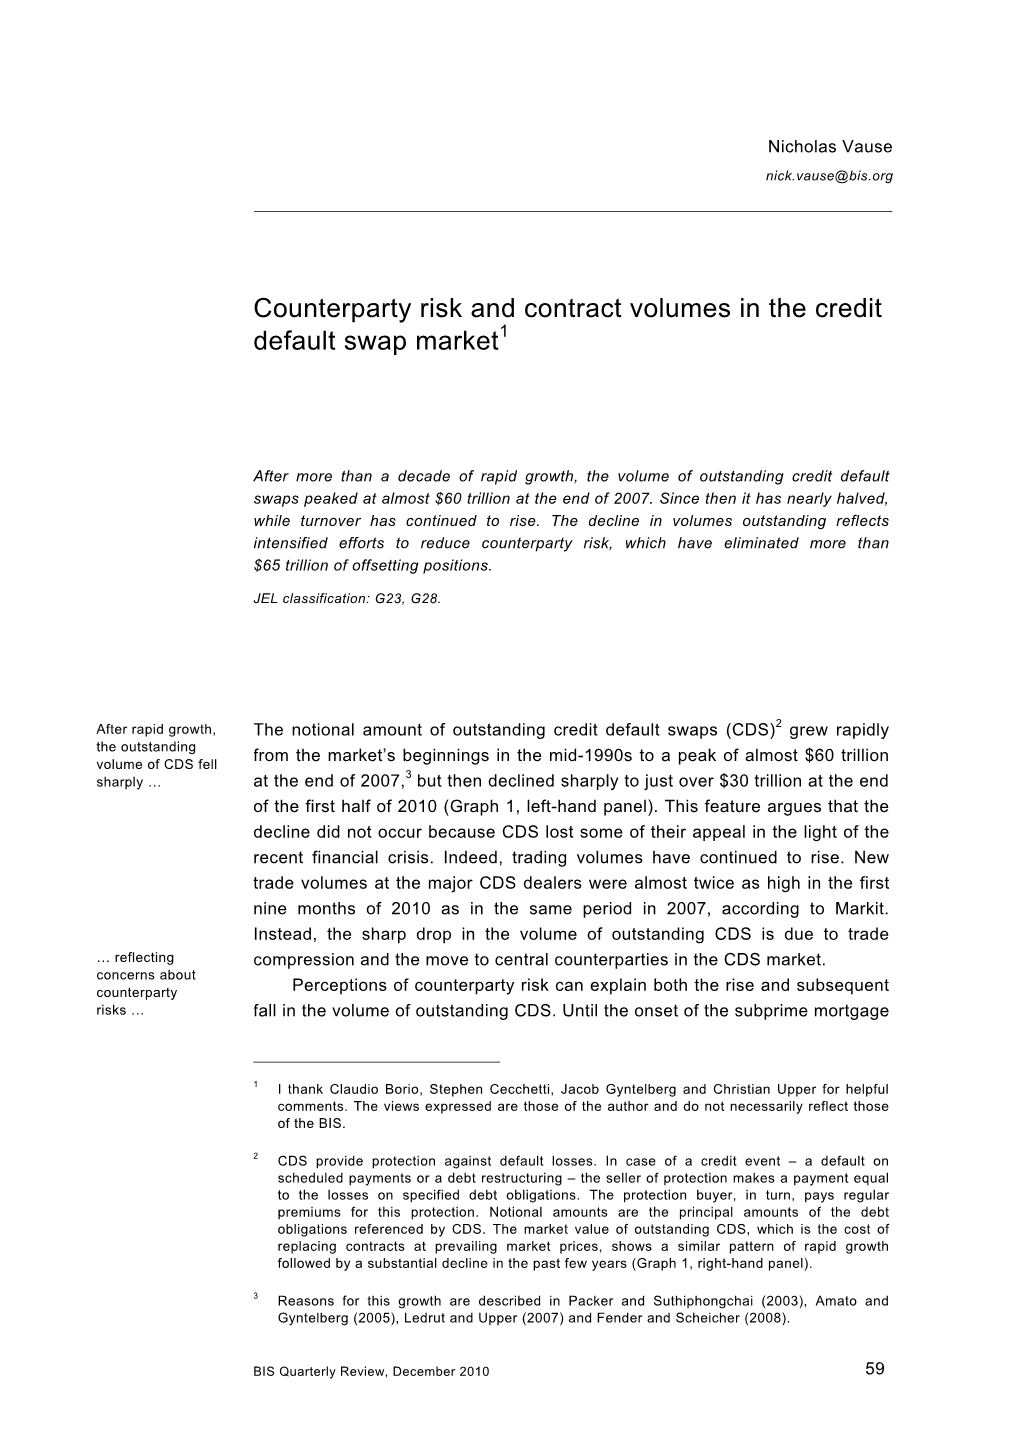 Counterparty Risk and Contract Volumes in the Credit Default Swap Market1